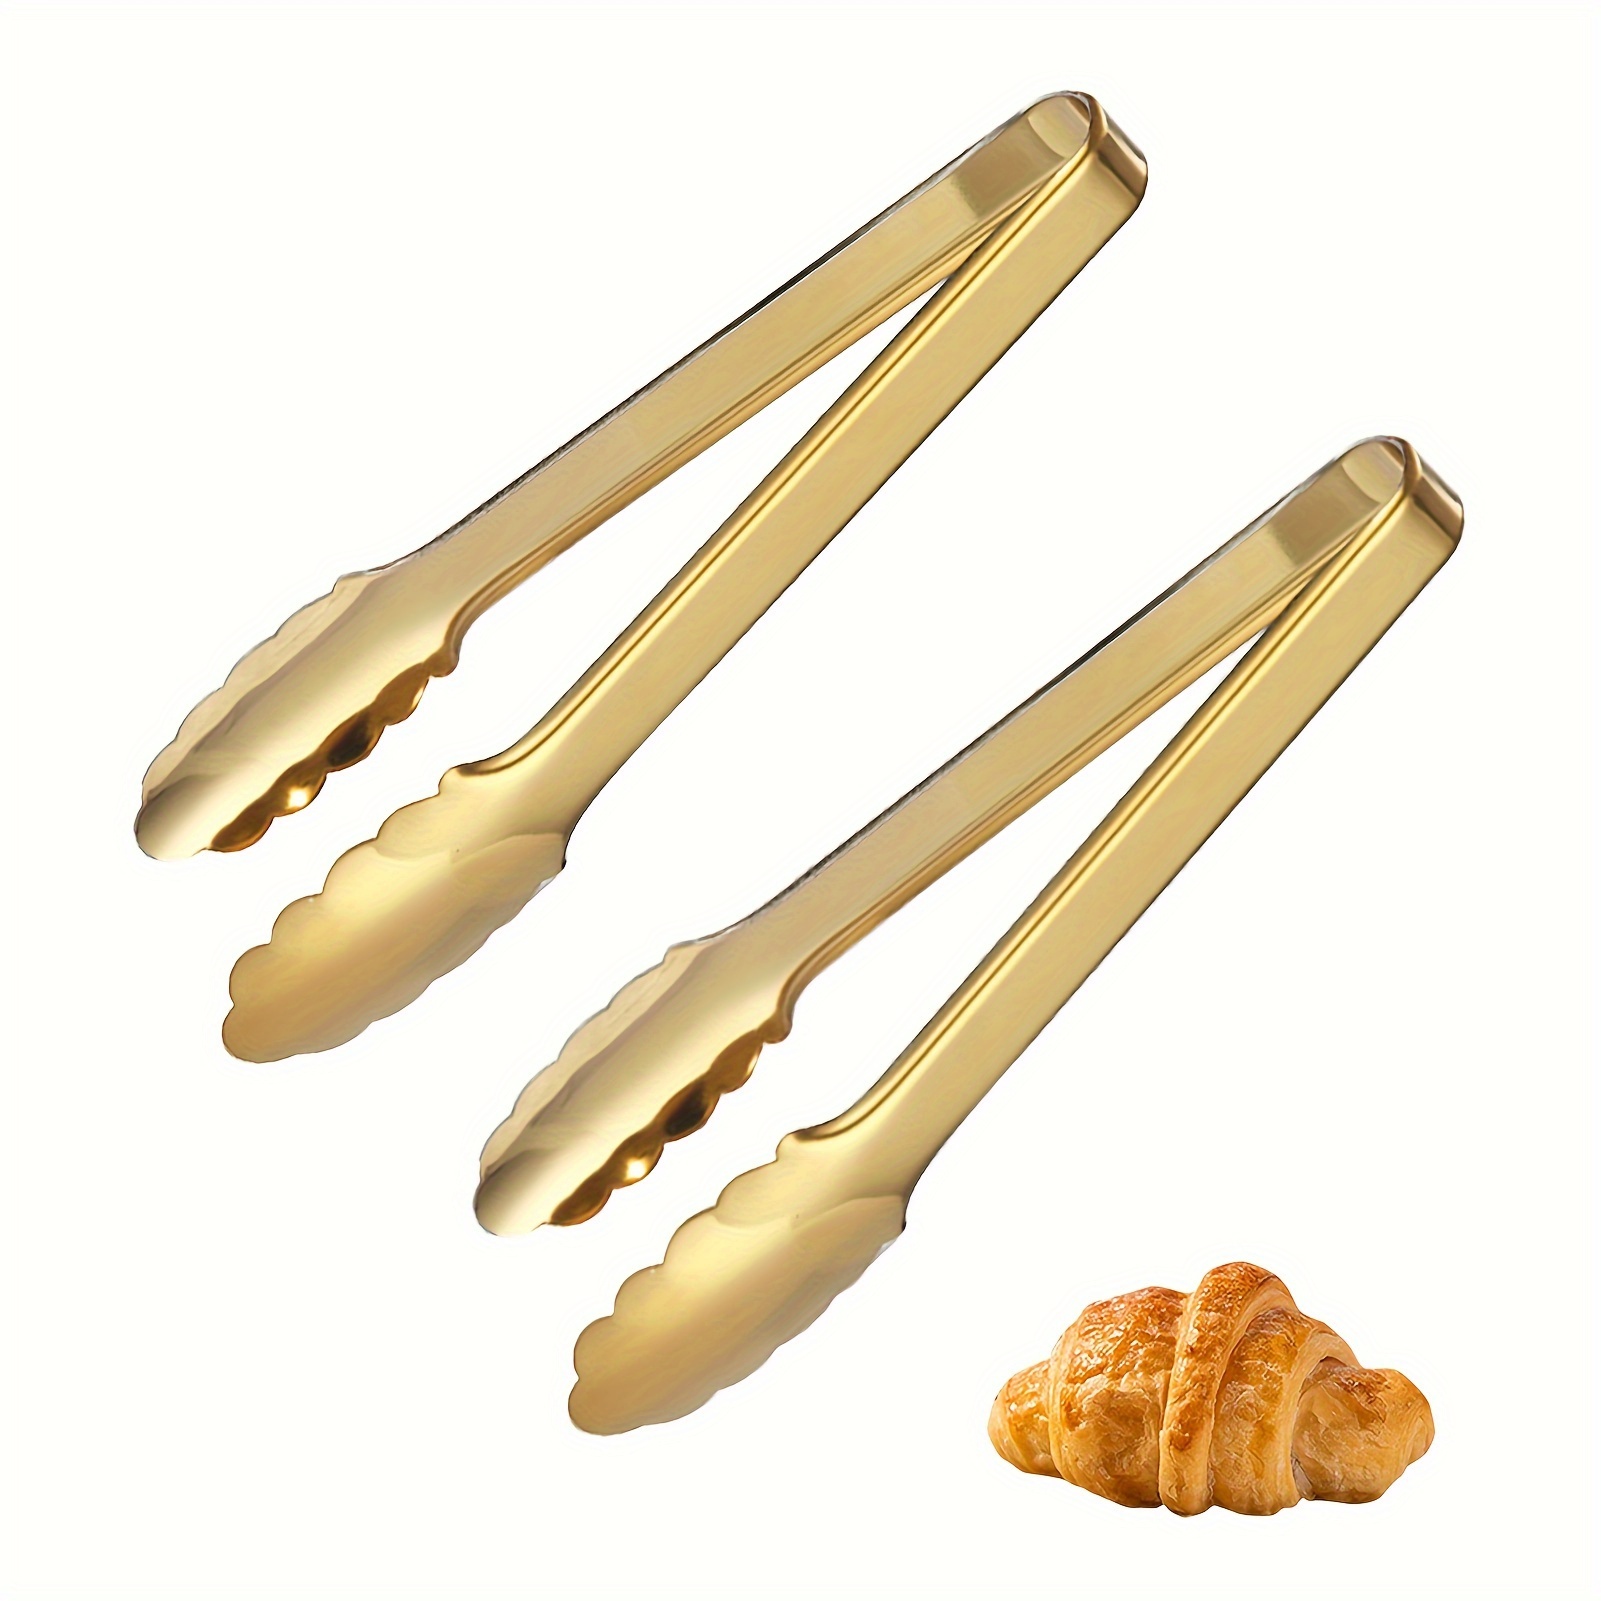 

2-piece Metallic Finish Stainless Steel Serving Tongs, 9" Easy Grip - Ideal For Buffet & Parties